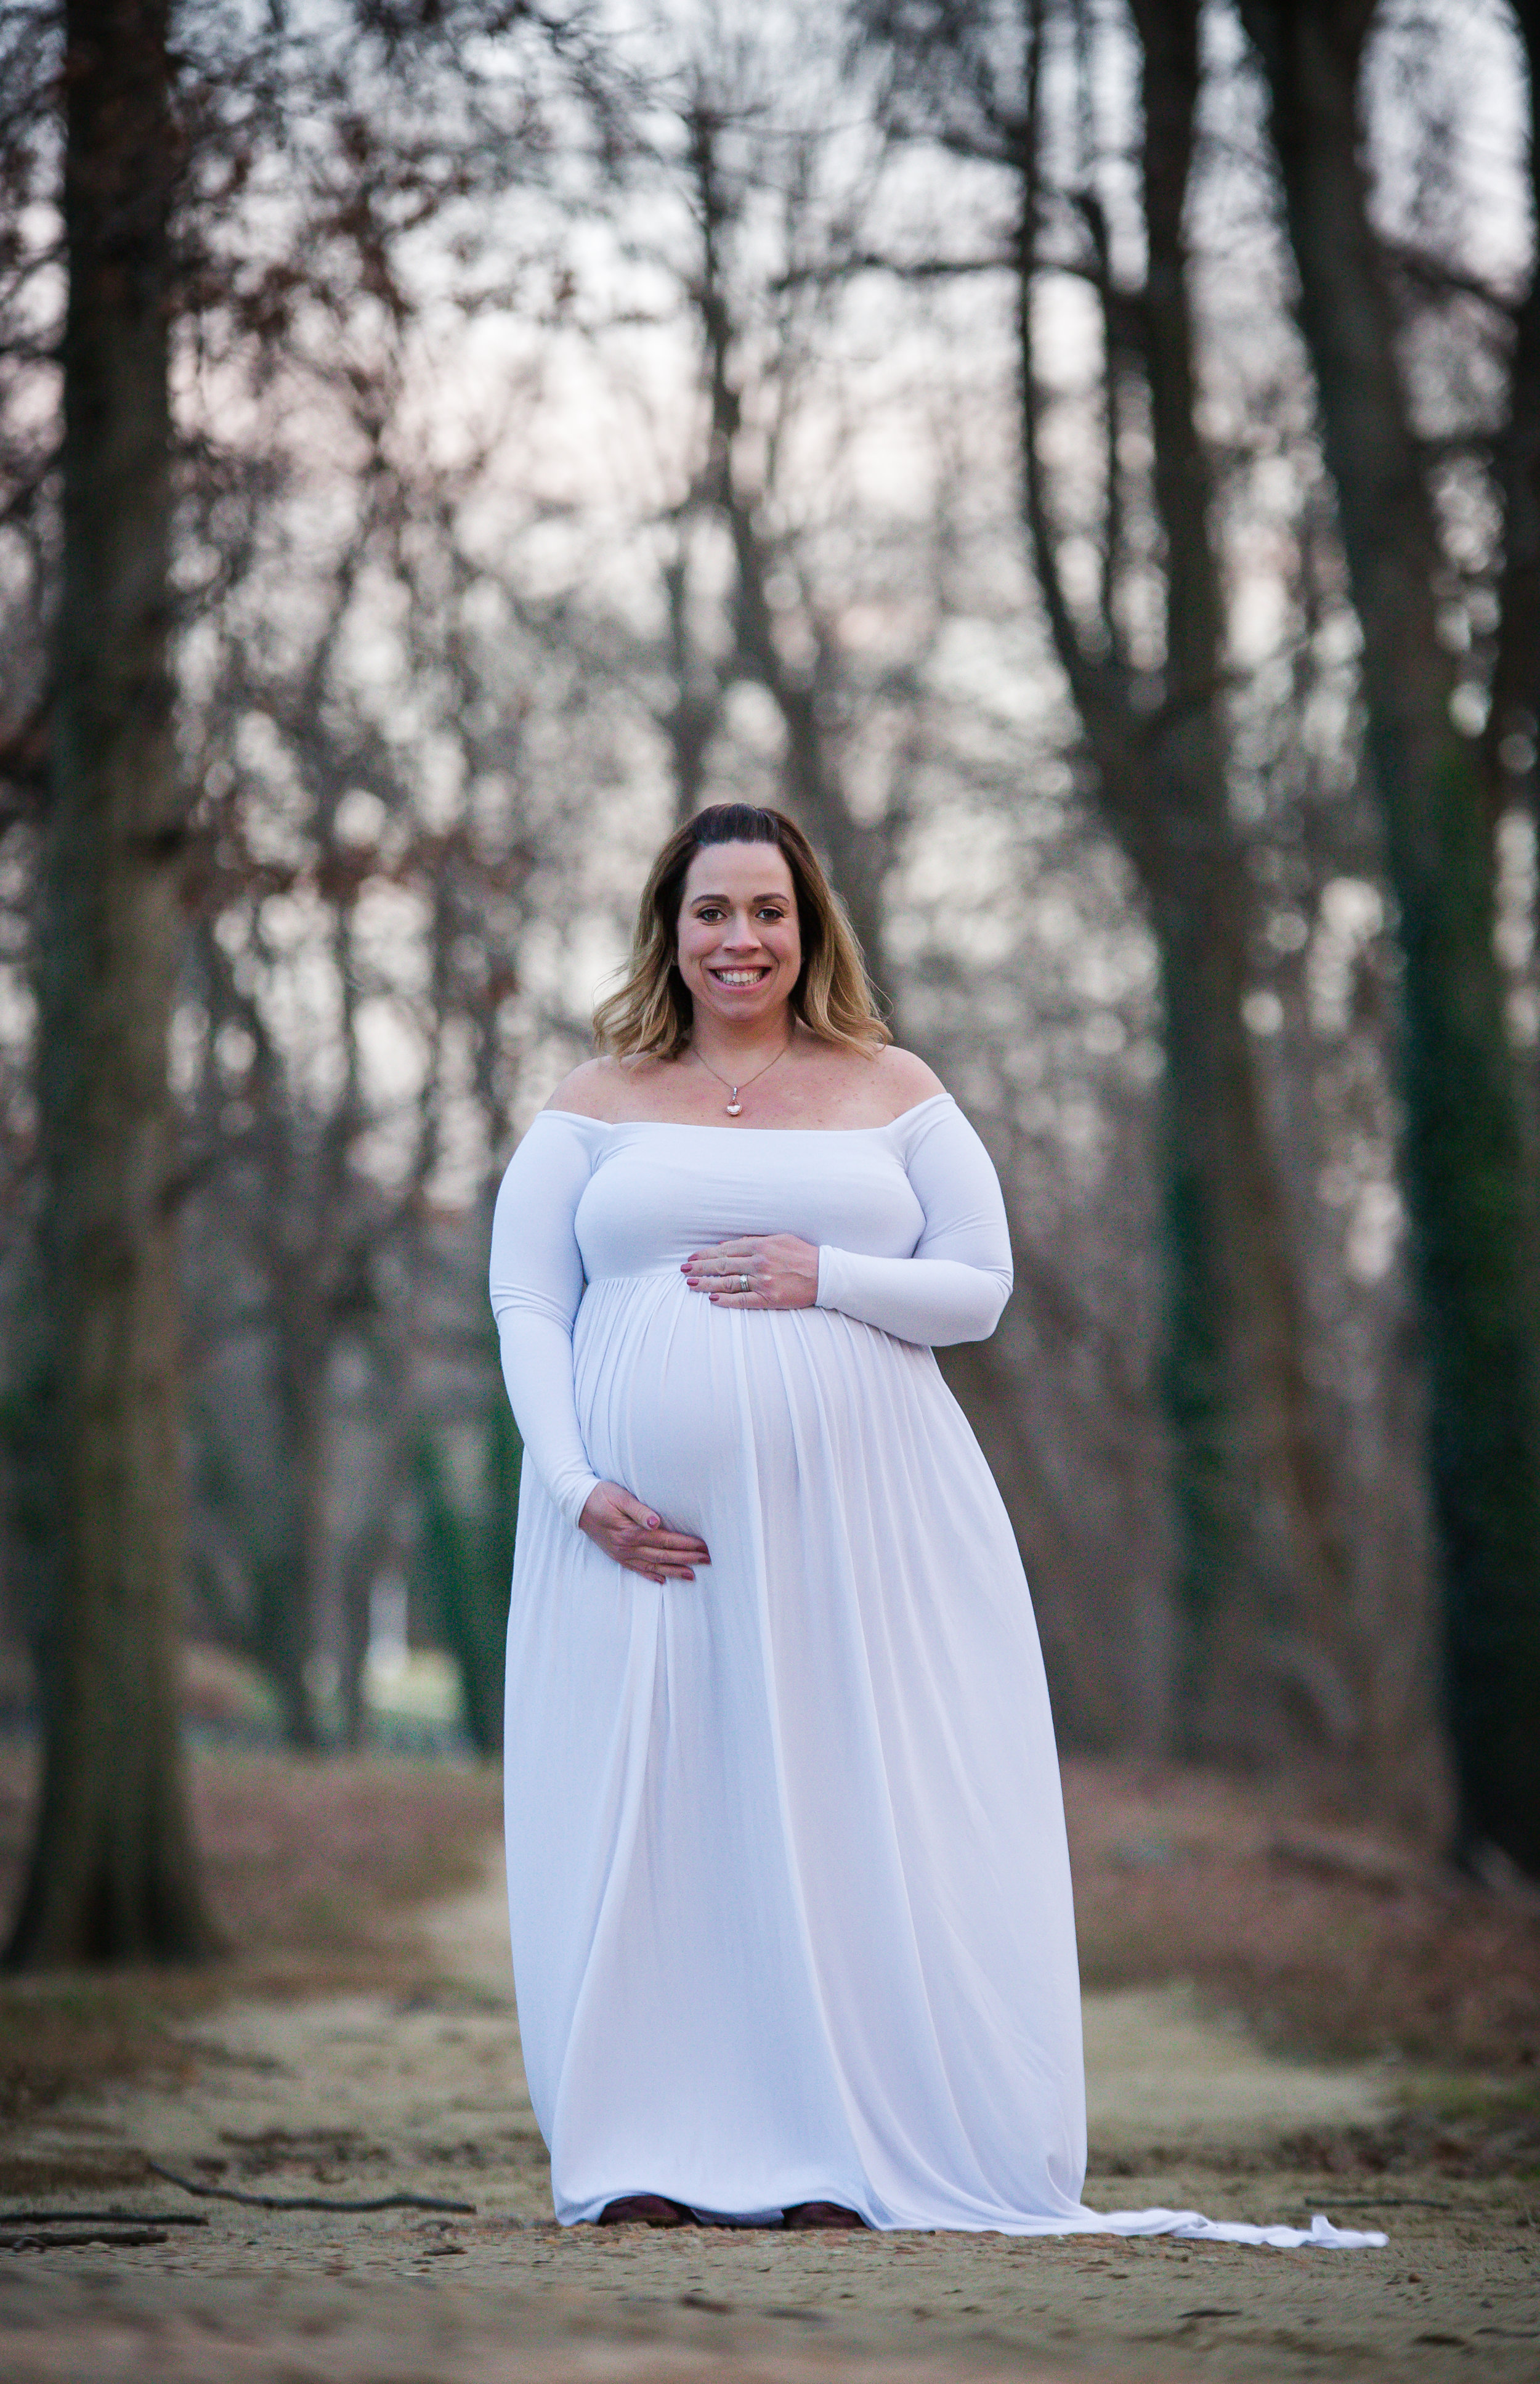 pregnant photo wearing a white dress in the winter time